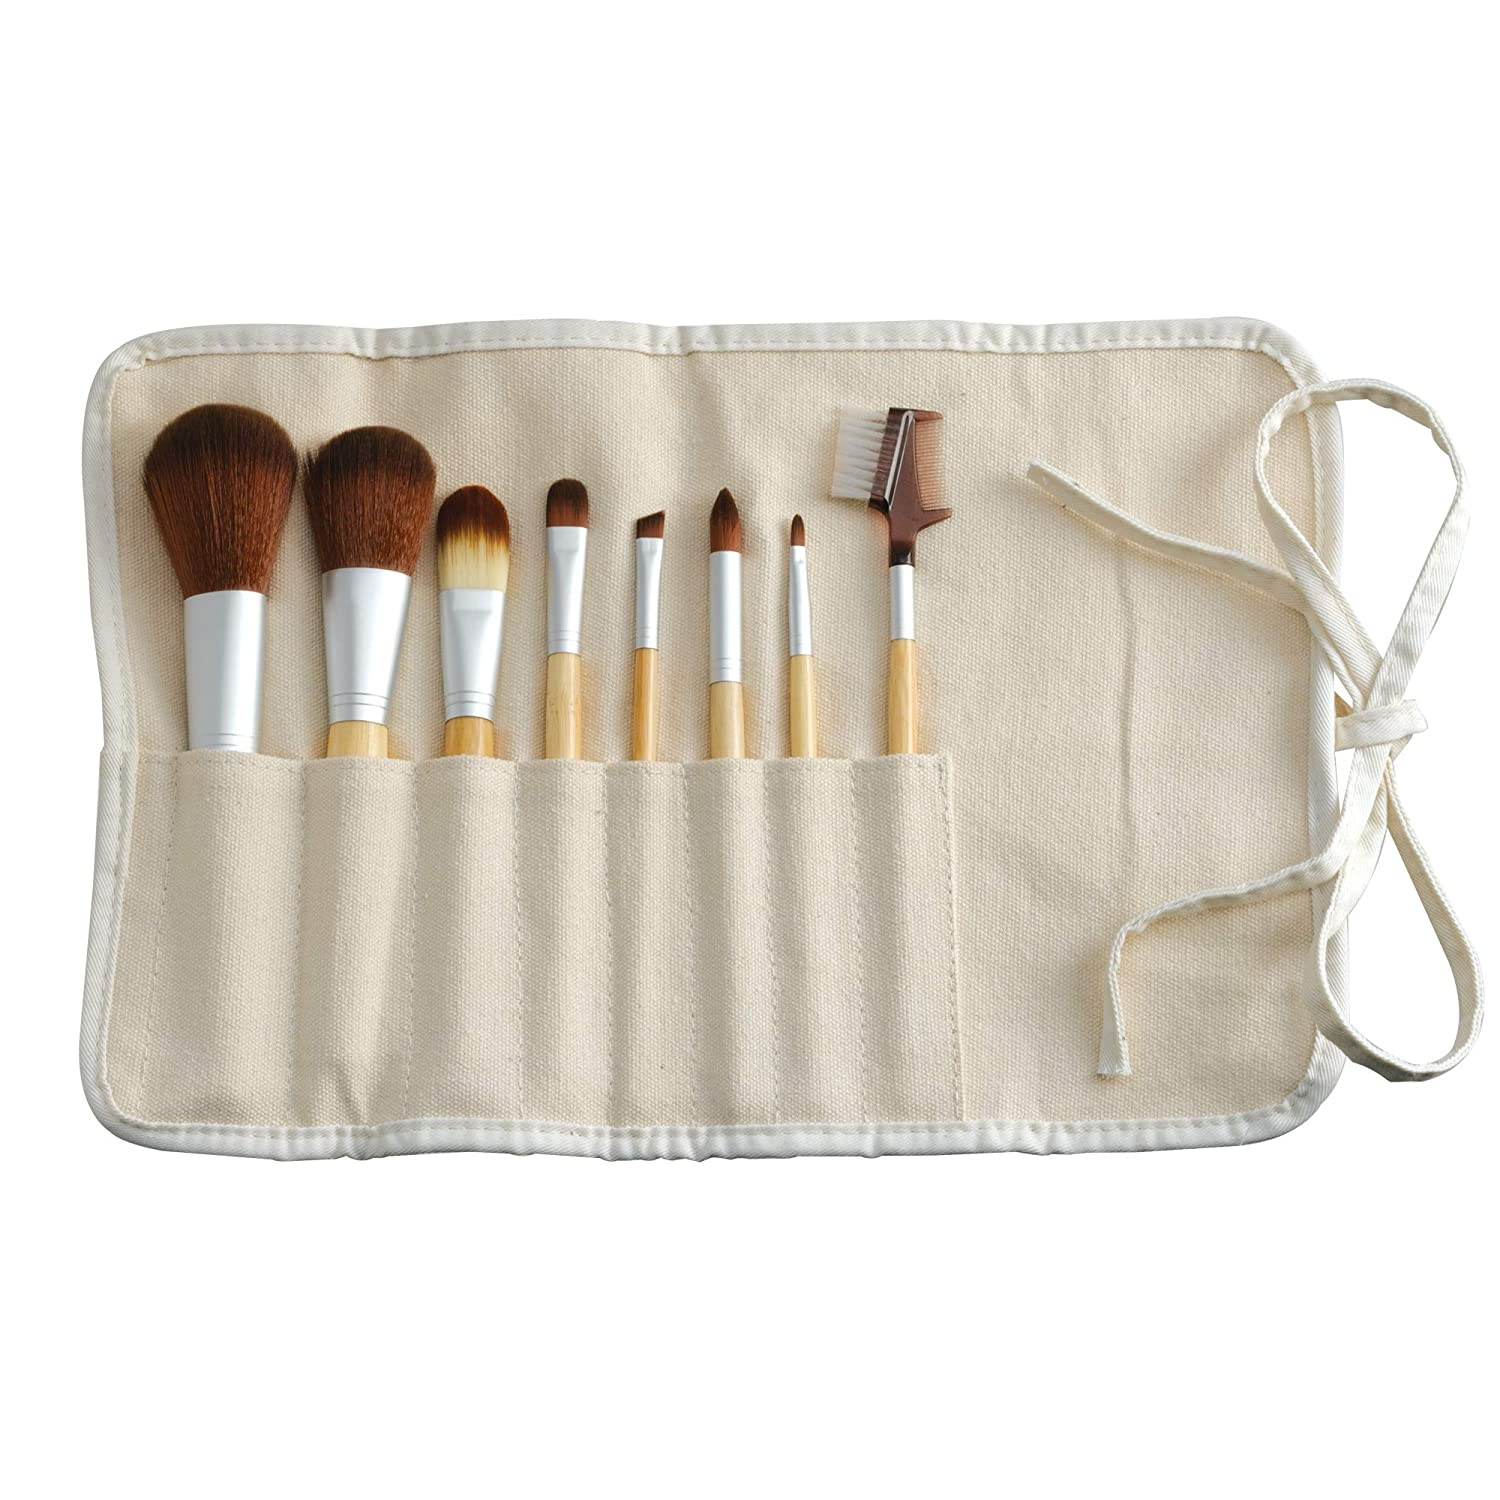 21 Best Makeup Brushes & Cosmetic Brush Sets For 2020 | Orglamix